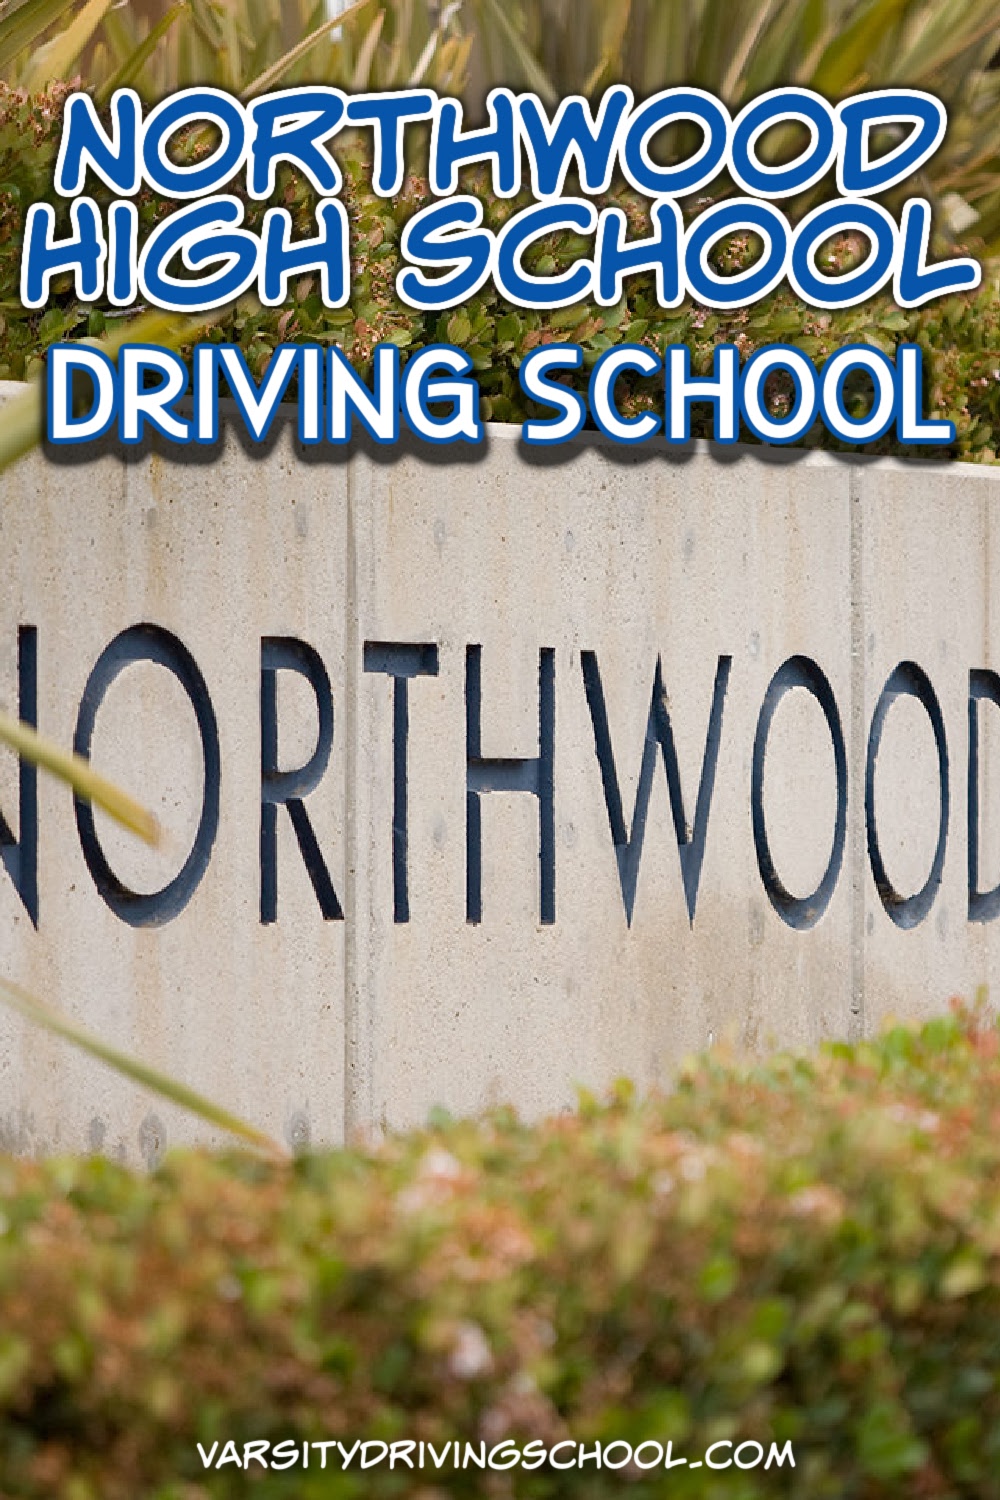 Varsity Driving School is the best Northwood High School driving school for multiple reasons, and success is the most important among them.